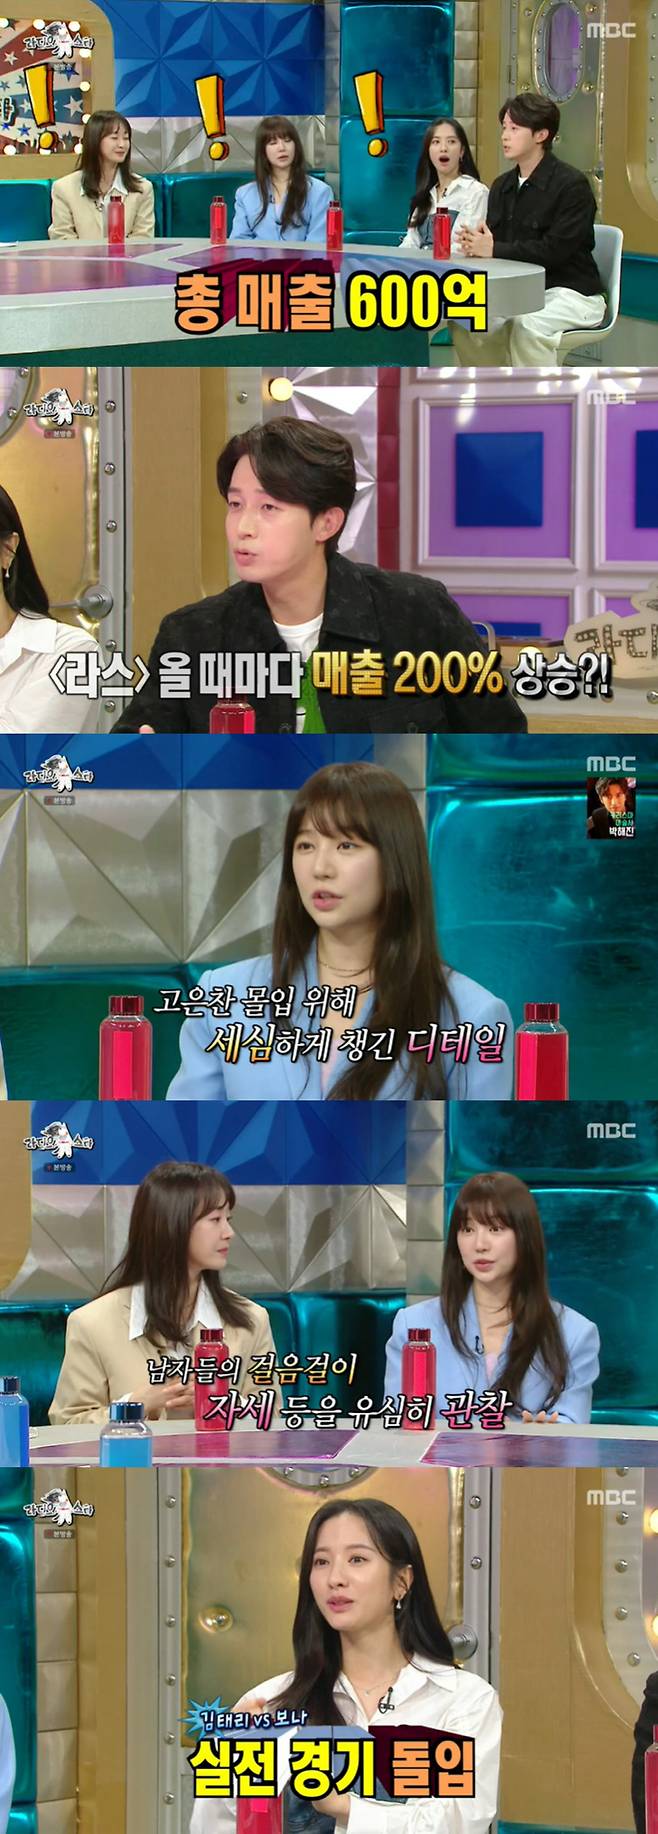 Radio Star Heo Kyoung-hwan told the episode of Kim Ji-min, who became Kim Jun-hos lover, from business sales.In MBC entertainment program Radio Star broadcasted on the 27th, Myung Se-bin, Yoon Eun-hye, Bona, Heo Kyoung-hwan appeared as guests.Heo Kyoung-hwan, who also succeeded as CEO of chicken breasts, said of the reason for appearing on Radio Star, Did you come when the writer came when he was 15 billion won (sales) during the preliminary interview?I wanted to clean up the assets in this case, he said. I do not include VAT and I am making sales of about 60 billion won. Heo Kyoung-hwan said, Every time Radio Star comes, sales rise by 200%. Recently, it merged with the largest milk kit company in Korea.Now that the scale is so large, I will leave it to a professional manager and I will concentrate on broadcasting. Yoon Eun-hee has applied hair growth to his eyebrows for the styling of the drama Coffee Prince 1st Store, which solidifies the First Love image.Yoon Eun-hye said, I was almost the first to try a male female station, so I watched the mens steps and posture for a long time.I lived in mens clothes for a month ago, and I wore sponsored clothes to look like the clothes I wore. In the meantime, the space girl Bona completed the 2022 First Love image with tvN Twenty 5 Twinty One.I was practicing Miri four months ago and I was trained to play with Kim Tae-ri. Bona said, I was trained in Miri.Both of them have a lot of fighting, so if one of them loses, I tried to get back next week and practiced. Bona also mentioned Kim Tae-ris extraordinary passion: Bona said: I was surprised to see him really hard, I invited him home once and the distance is quite a bit.It is more than an hours walk, but I ran the street with a sandbag. It was shocking in a good sense. Nam Joo-hyuks first impression, which was in close contact with him, was different from his thoughts. I did a lot of expectations, Bona said.I had a picture that I imagined, but on the day of reading the script, Ju-hyuk came on a kickboard and Tari came on a bicycle.There are many Settais, and they make people around us comfortable. They also make a lot of gags. (Nam Joo-hyuk) likes gags, Nam said.Myung Se-bin had shaved for a snack ad; Myung Se-bin said: Ive had an offer before, but it was an ad for painkillers.Conti was related to the monk, but he refused because of religion. But the advertisement was an advertisement for a friend with leukemia.Heo Kyoung-hwan said, I felt strange when I heard the news of Oh Namis devotion, who was a virtual couple. Oh Nami did not reveal his boyfriend without any hesitation.I saw the broadcast and the static electricity spread to my body and my strength was loose. When I saw my boyfriend, Oh Nami wanted to see the height on his face.I was blessed because I wanted to meet a really good man now. Kim Ji-min also recently revealed her romance with Kim Jun-ho.Heo Kyoung-hwan said, Kim Ji-min and I were Settai and said, If we can not get married until we are 50 years old, we will do it alone. One day, I was looking at my cell phone at home.I dropped my cell phone at that time. I am going to hang up the Internet now. Heo Kyoung-hwan said, I met Jun-ho recently and he said that he was a Ji-min, so he corrected him as Brother.I do not smell anymore. Heo Kyoung-hwan said, I talked about fifty as a joke, but I can not wait eight years.I hope you have a good result, said Kim Ji-min.Yoon Eun-hye is an indispensable love line with Kim Jong Kook.In Running Man, there is Yoon Eun-hye collection even though Yoon Eun-hye did not appear.Yoon Eun-hye said: My brother Park Jae-seok sometimes talks about me on Running Man: What do you do when you play?I also talked about me, he said. So I called Park Jae-seok, my first words were Im sorry. I said it was okay, so Ill talk to you again next time. 